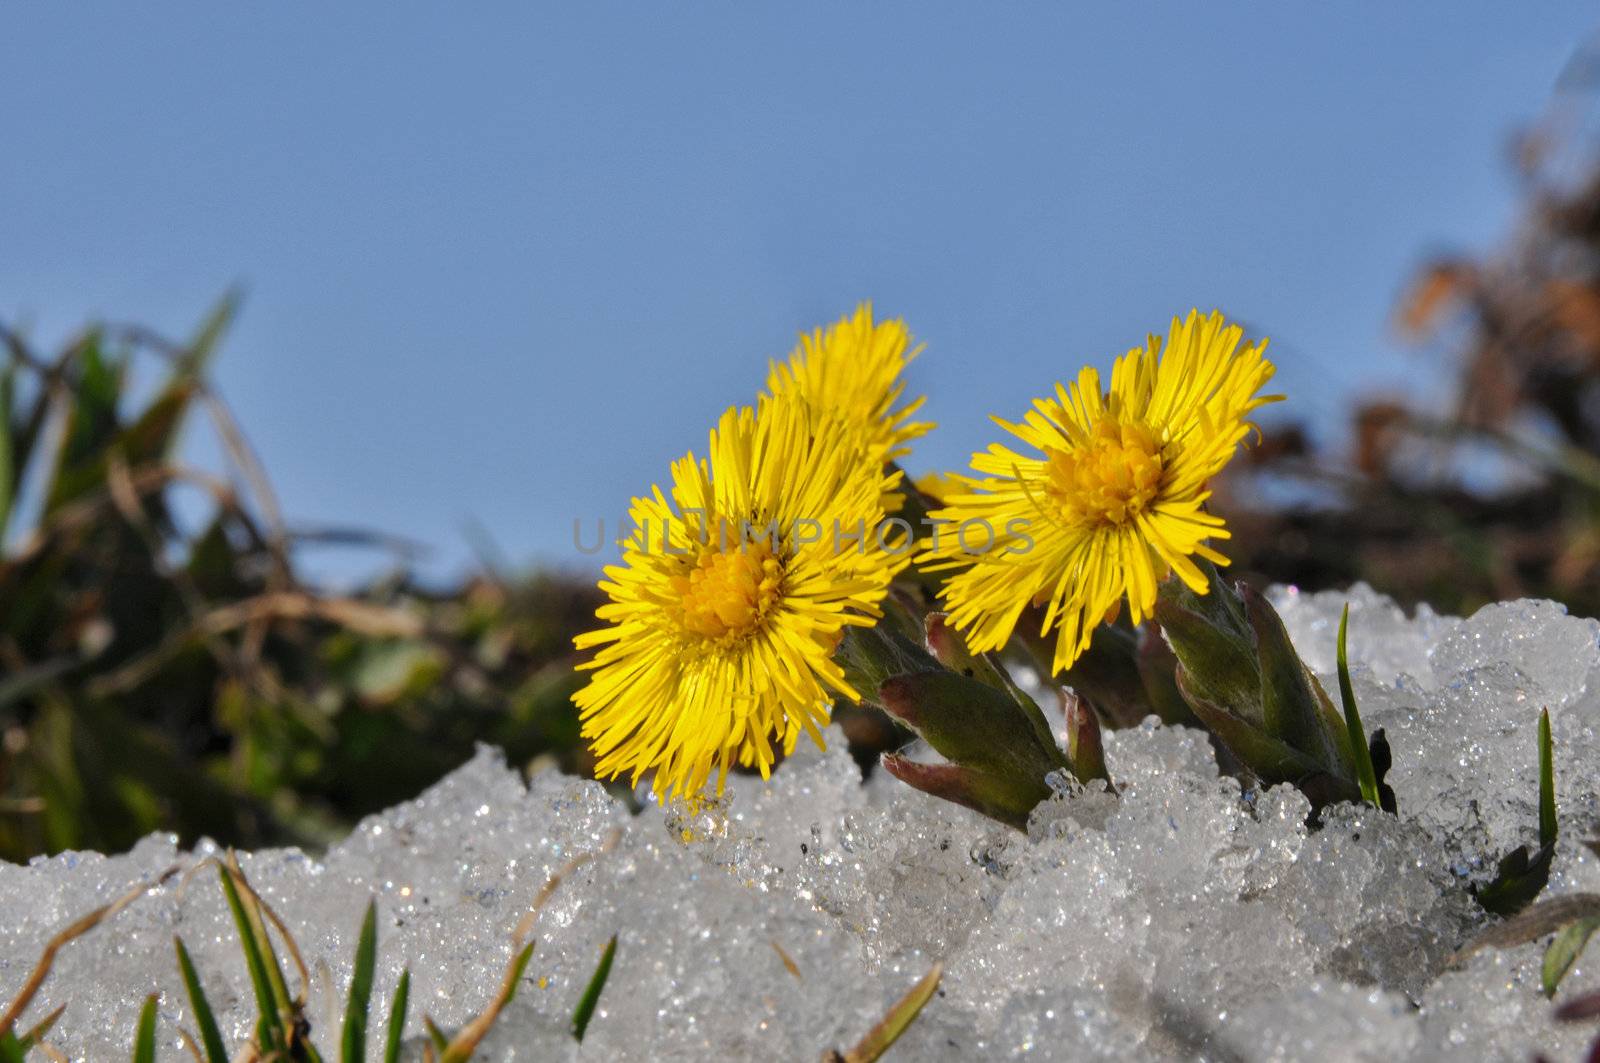 Coltsfoot in snow by kekanger